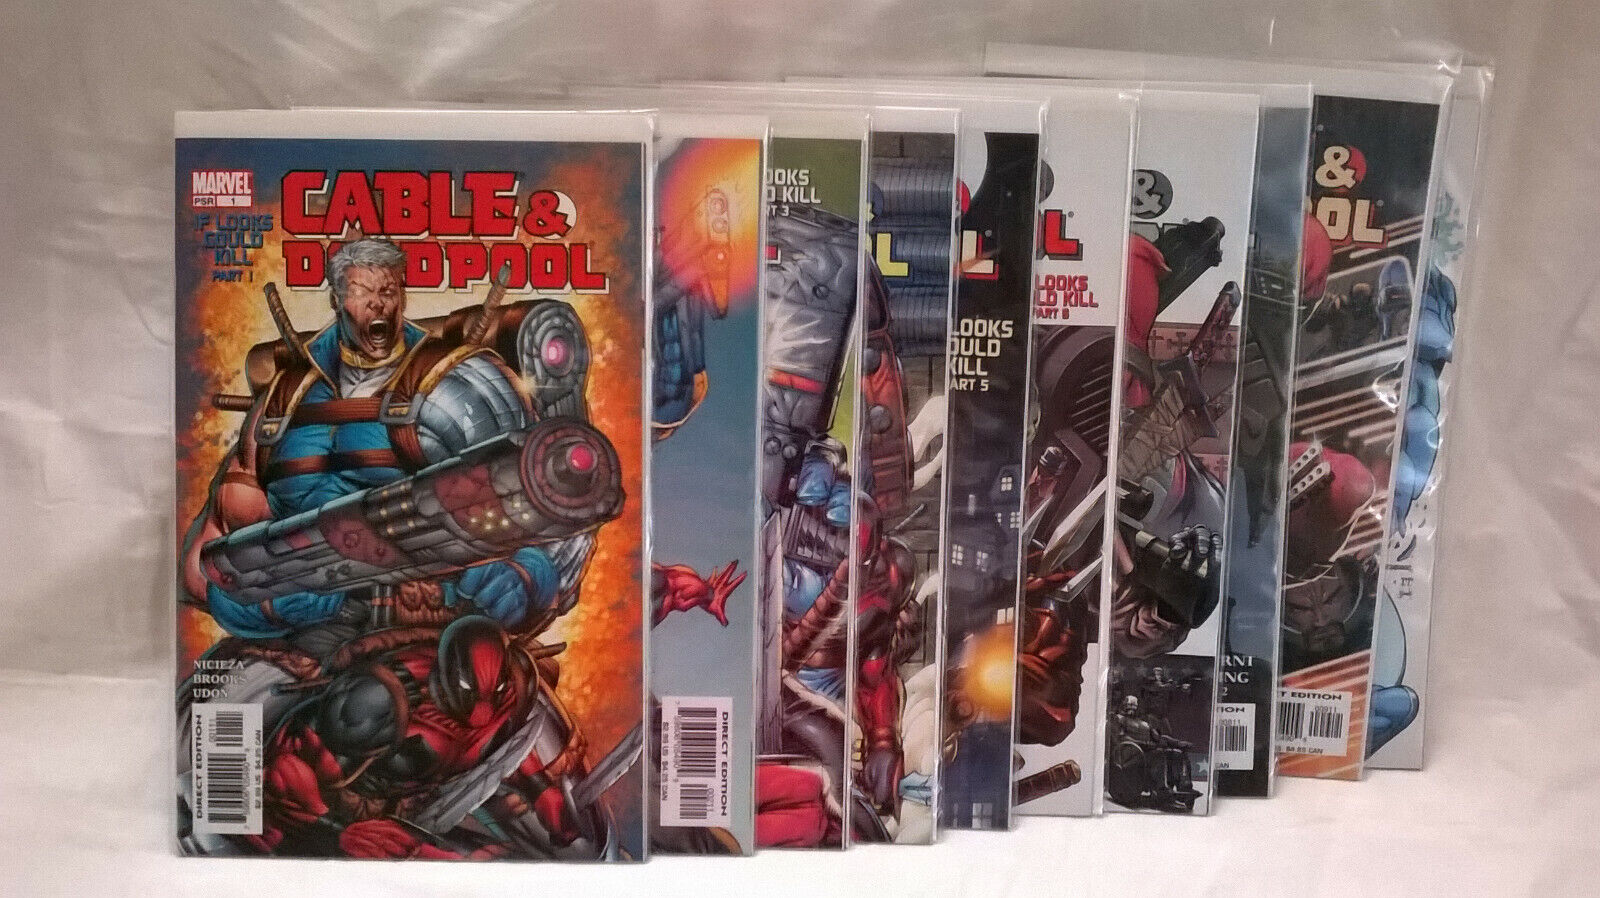 Cable & Deadpool #1-10 (Complete Early Run) | NM | Marvel Comics Lot